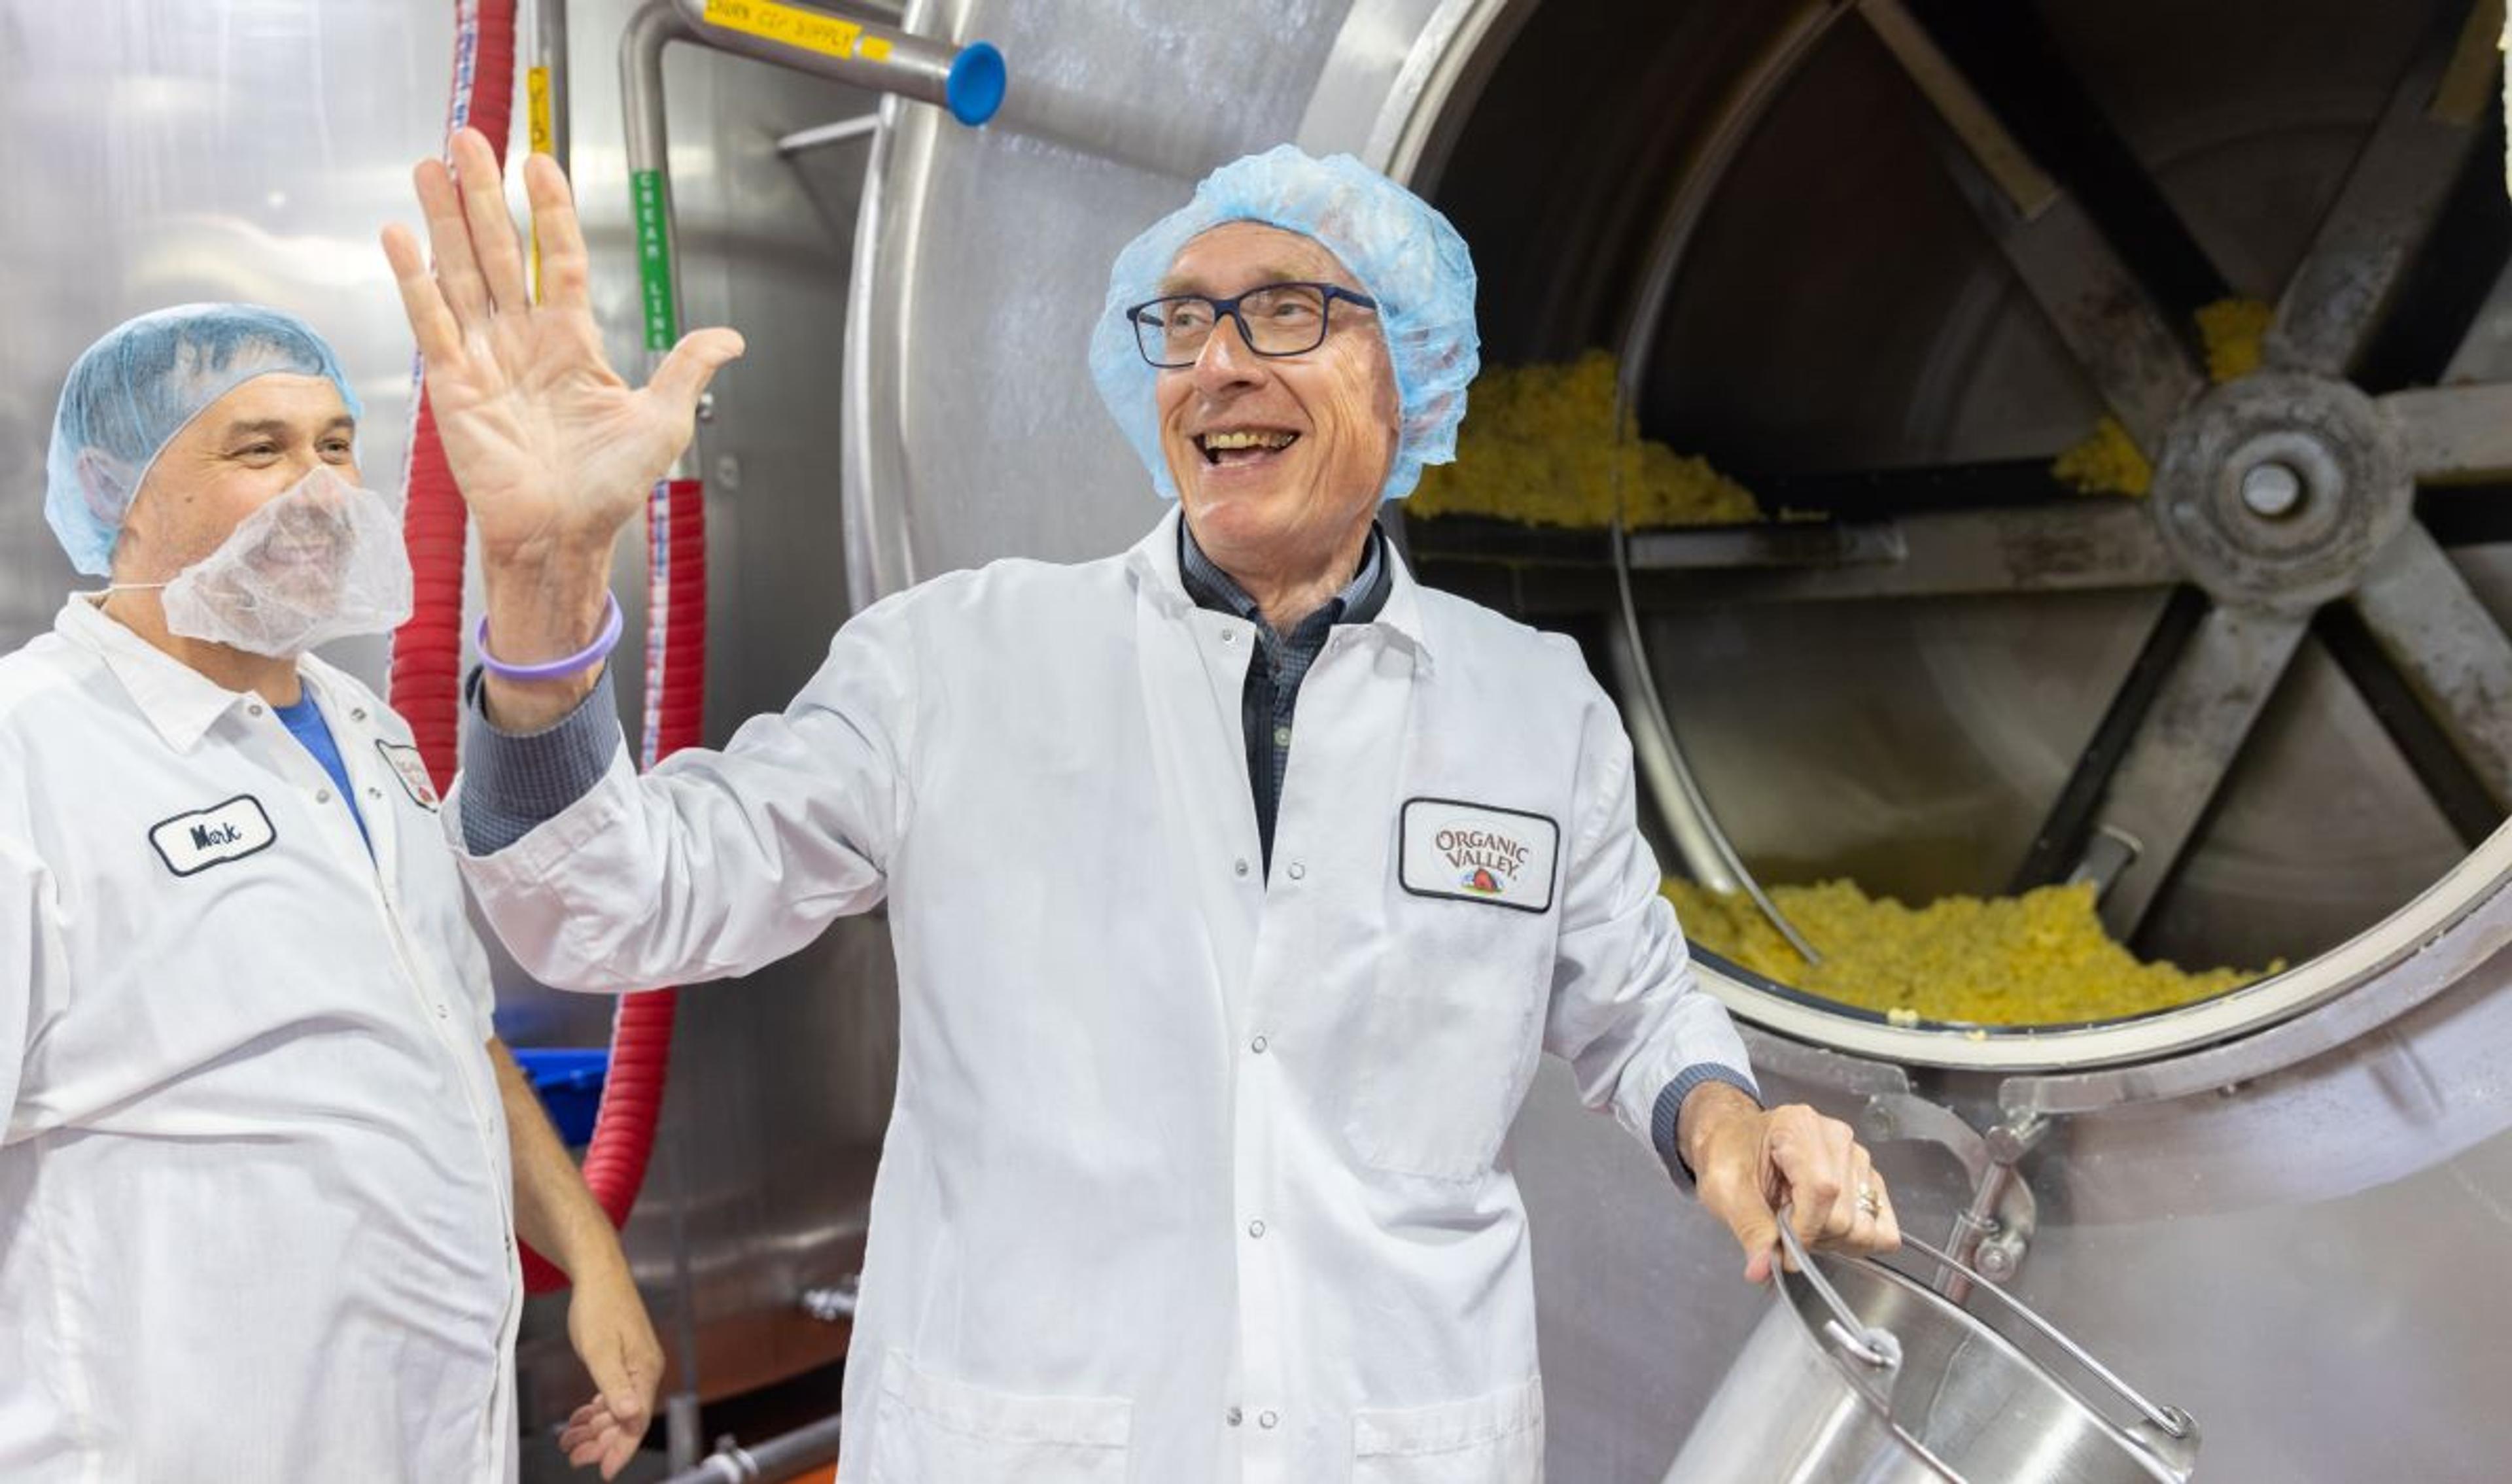 Wisconsin Gov. Tony Evers visited Chaseburg Creamery this week, where he helped make butter.